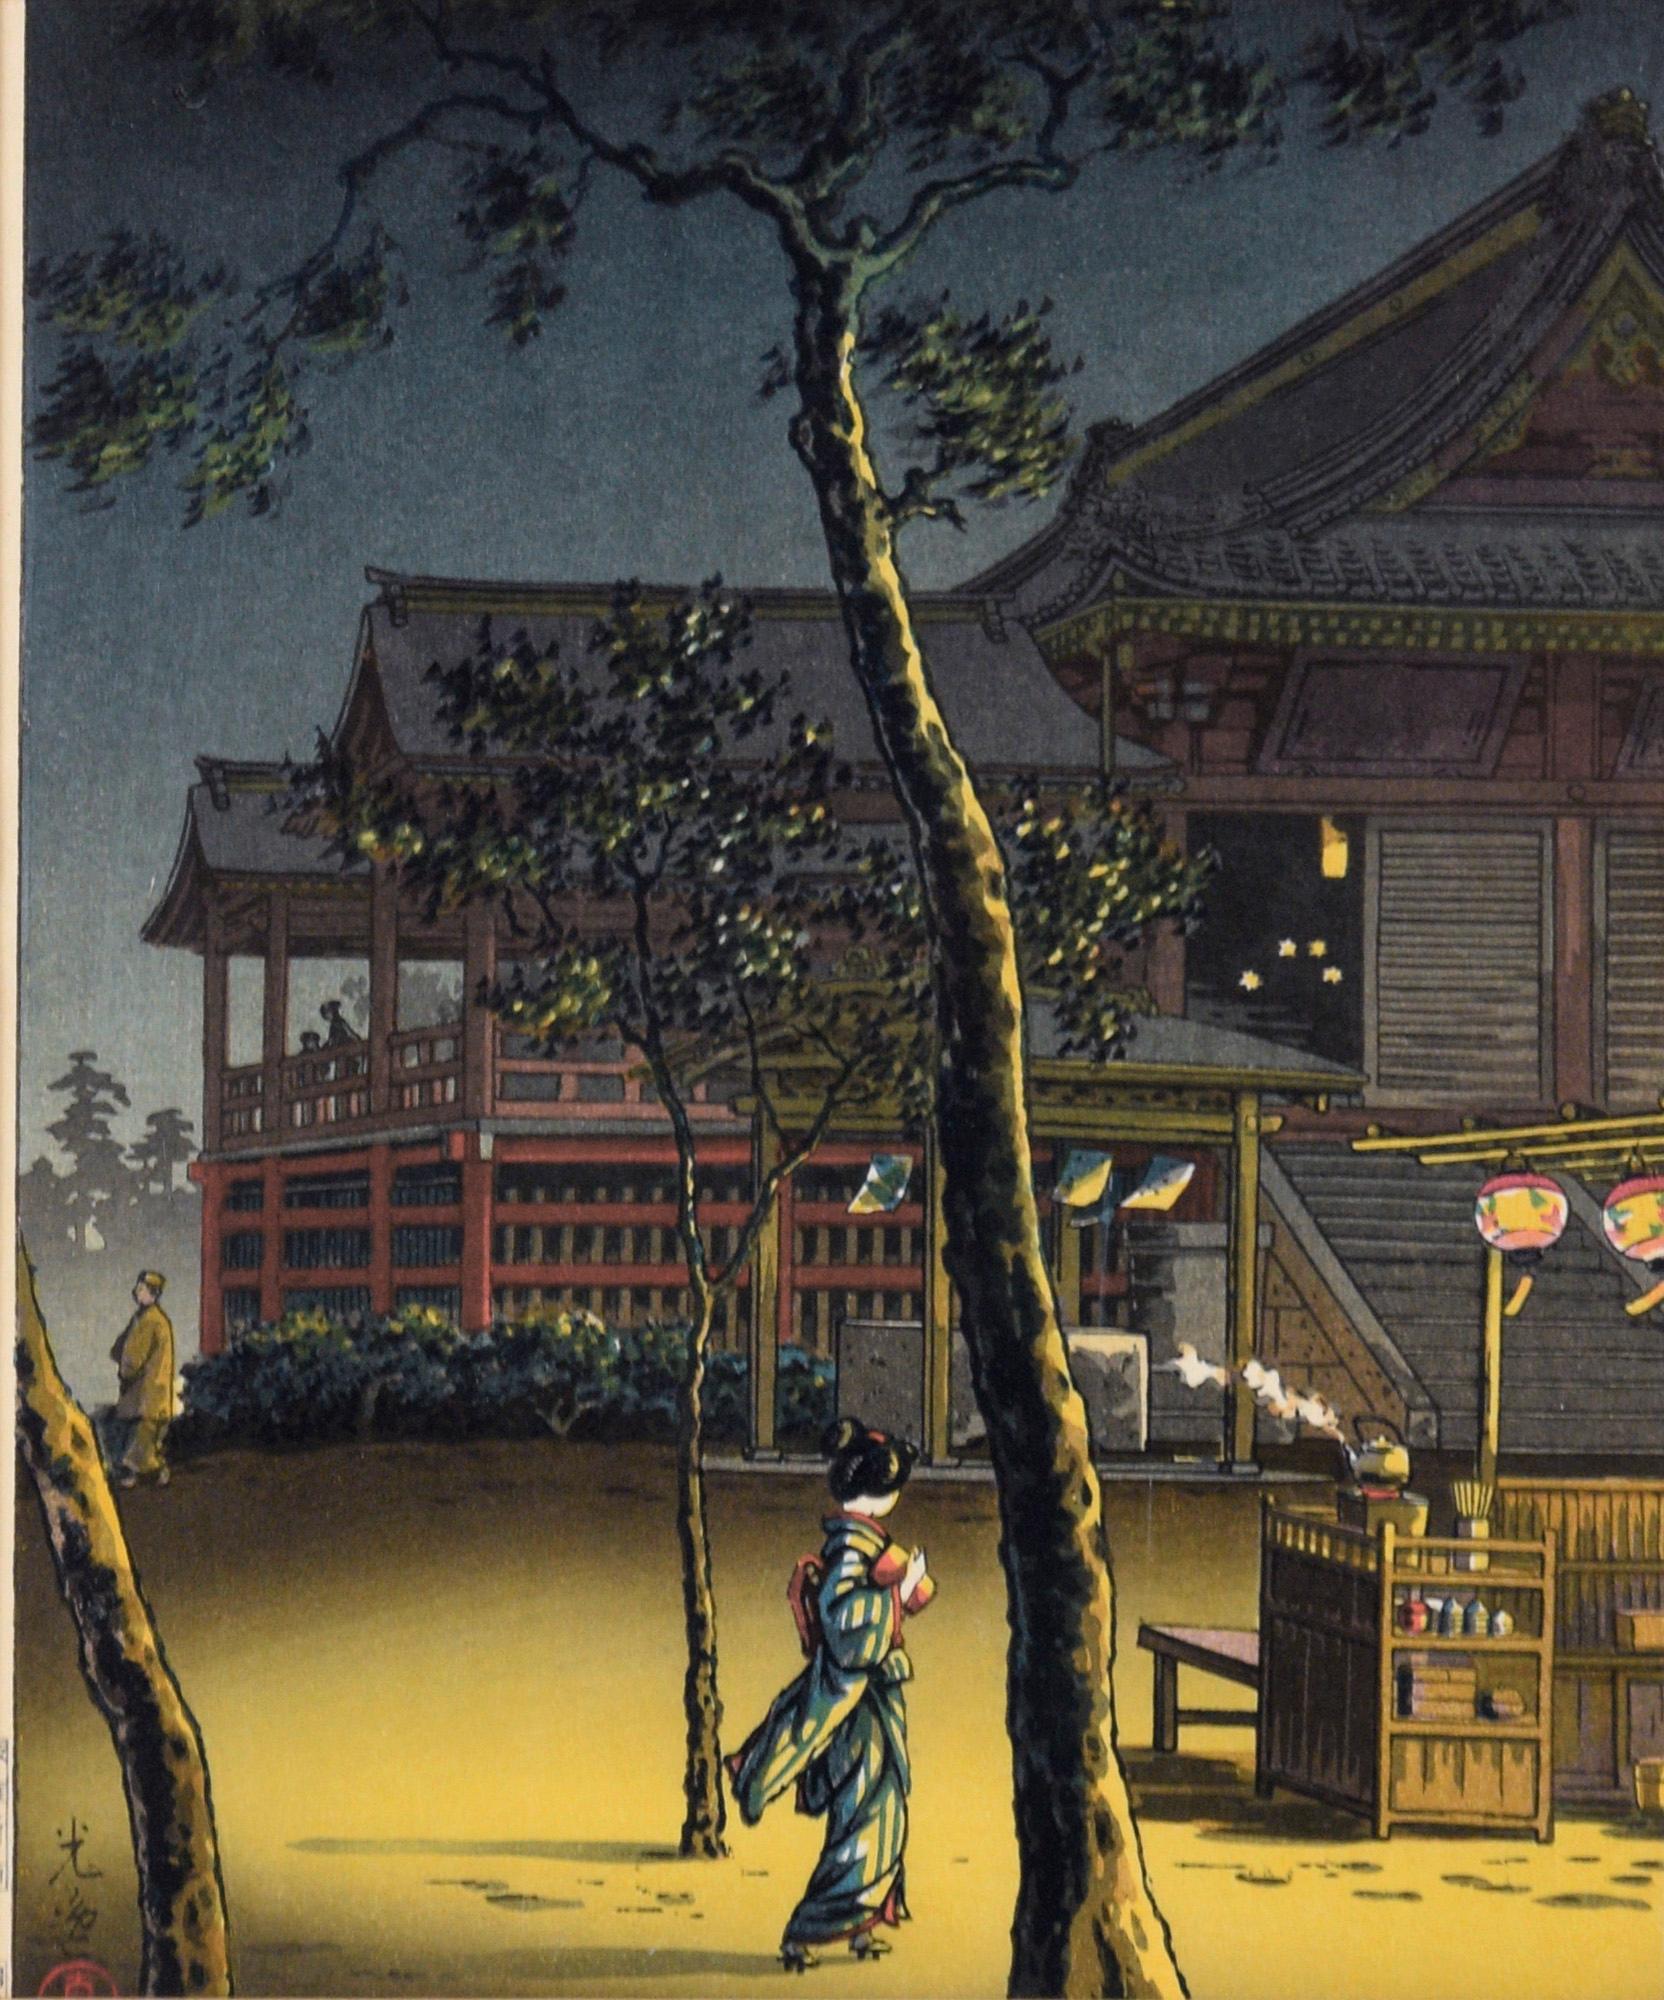 Tea Shop at Kiyomizu (Early Printing) - Nocturnal Woodblock Print on Paper

Gorgeous night scene by Tsuchiya Koitsu (Japanese, 1870-1949). The scene depicts a small tea shop in front of the Kiyomizu Temple in Ueno. A lady is passing in front of the